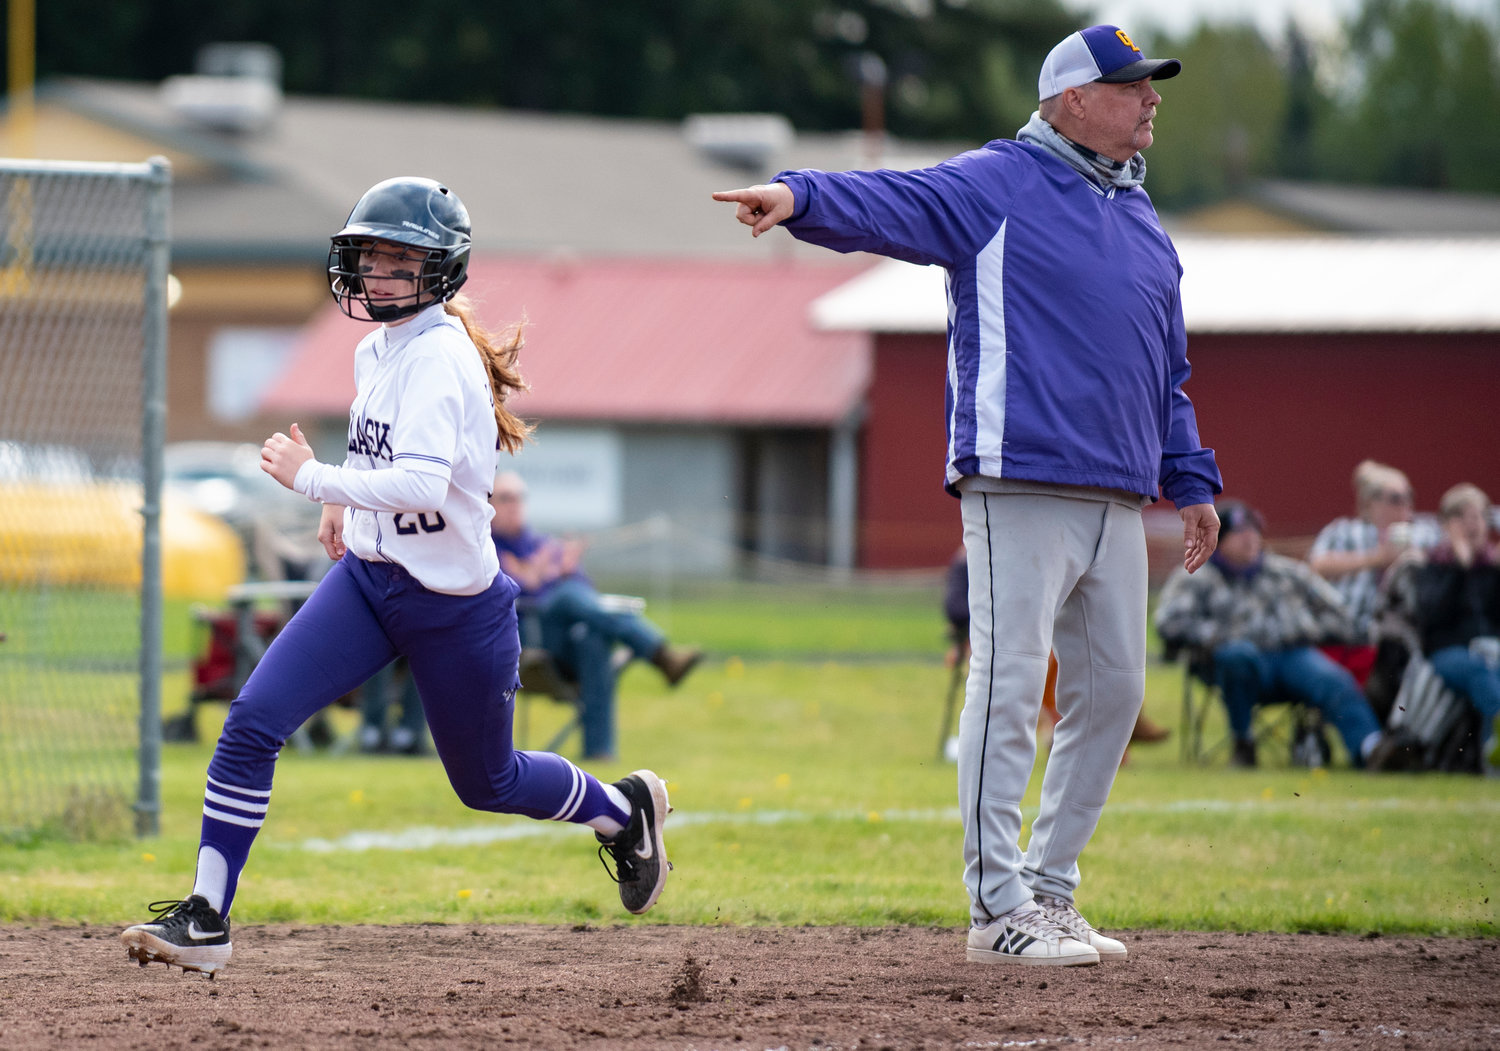 Onalaska's Taylor Babb rounds third to score while Loggers' coach Rich Teitzel waves her home.